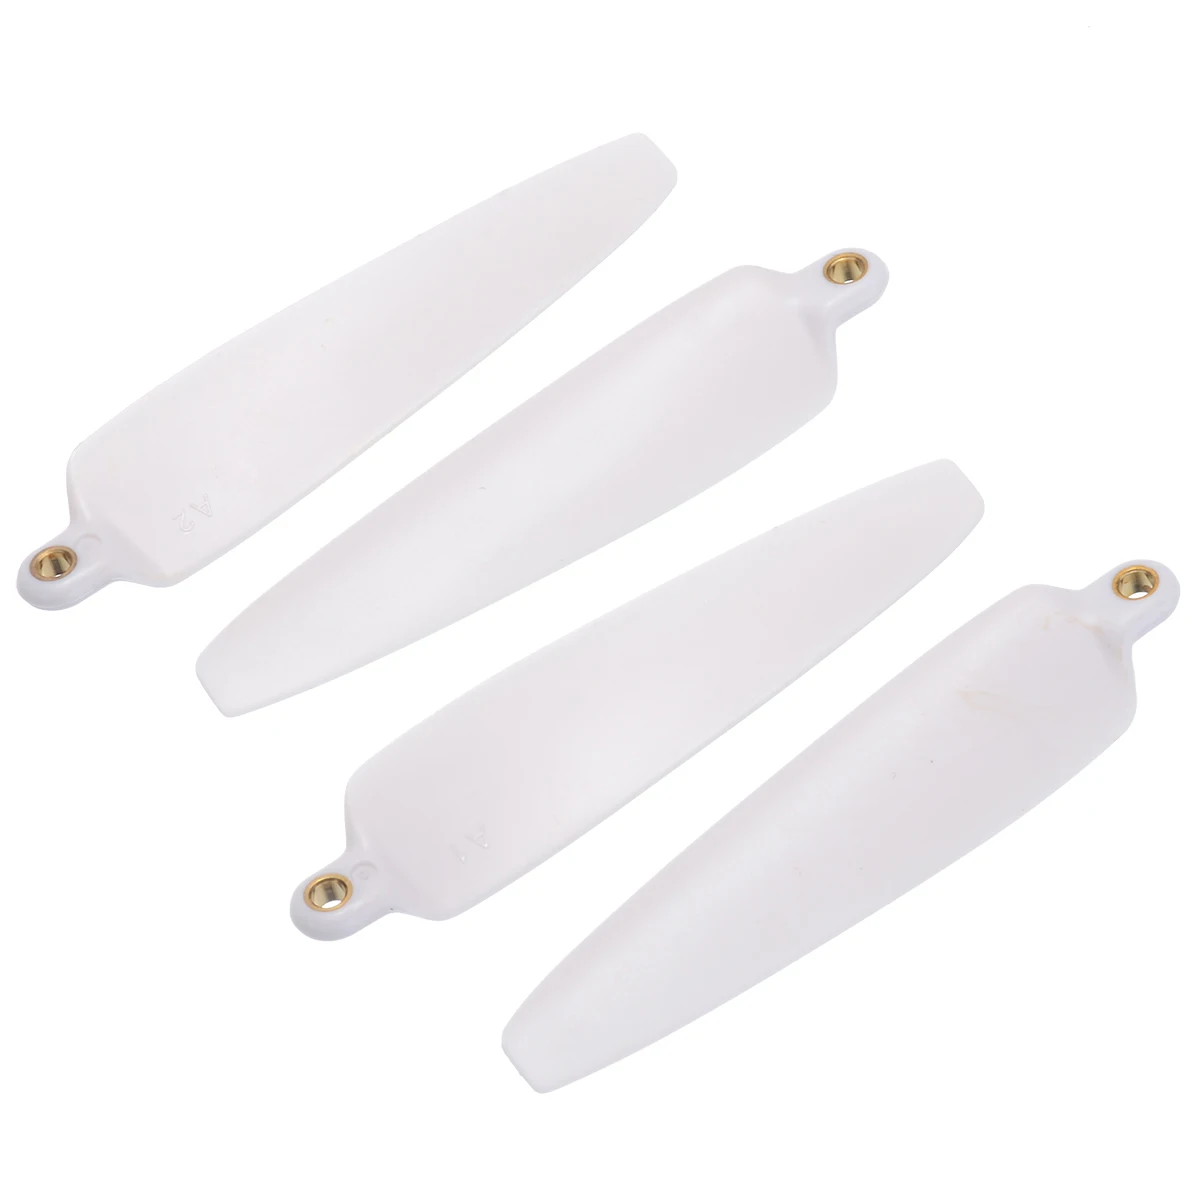 New Arrival 4Pcs/set White Propellers Props Replacement Kit For Yuneec Breeze Flying Camera Drone 4K